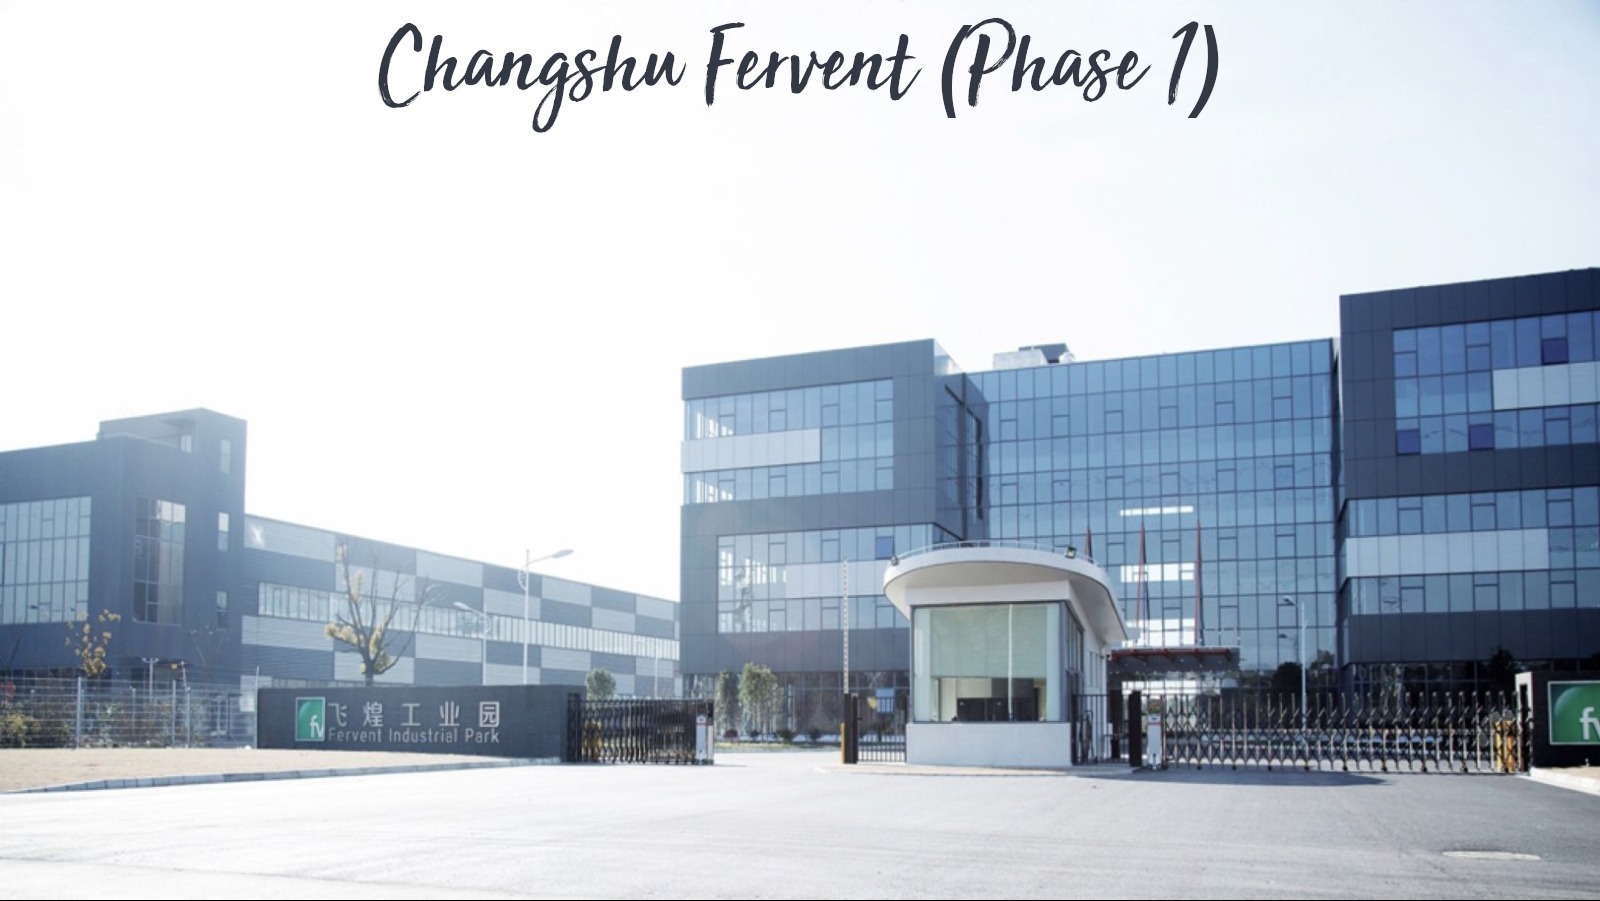 Changshu Fervent Industrial Park (Phase 1)